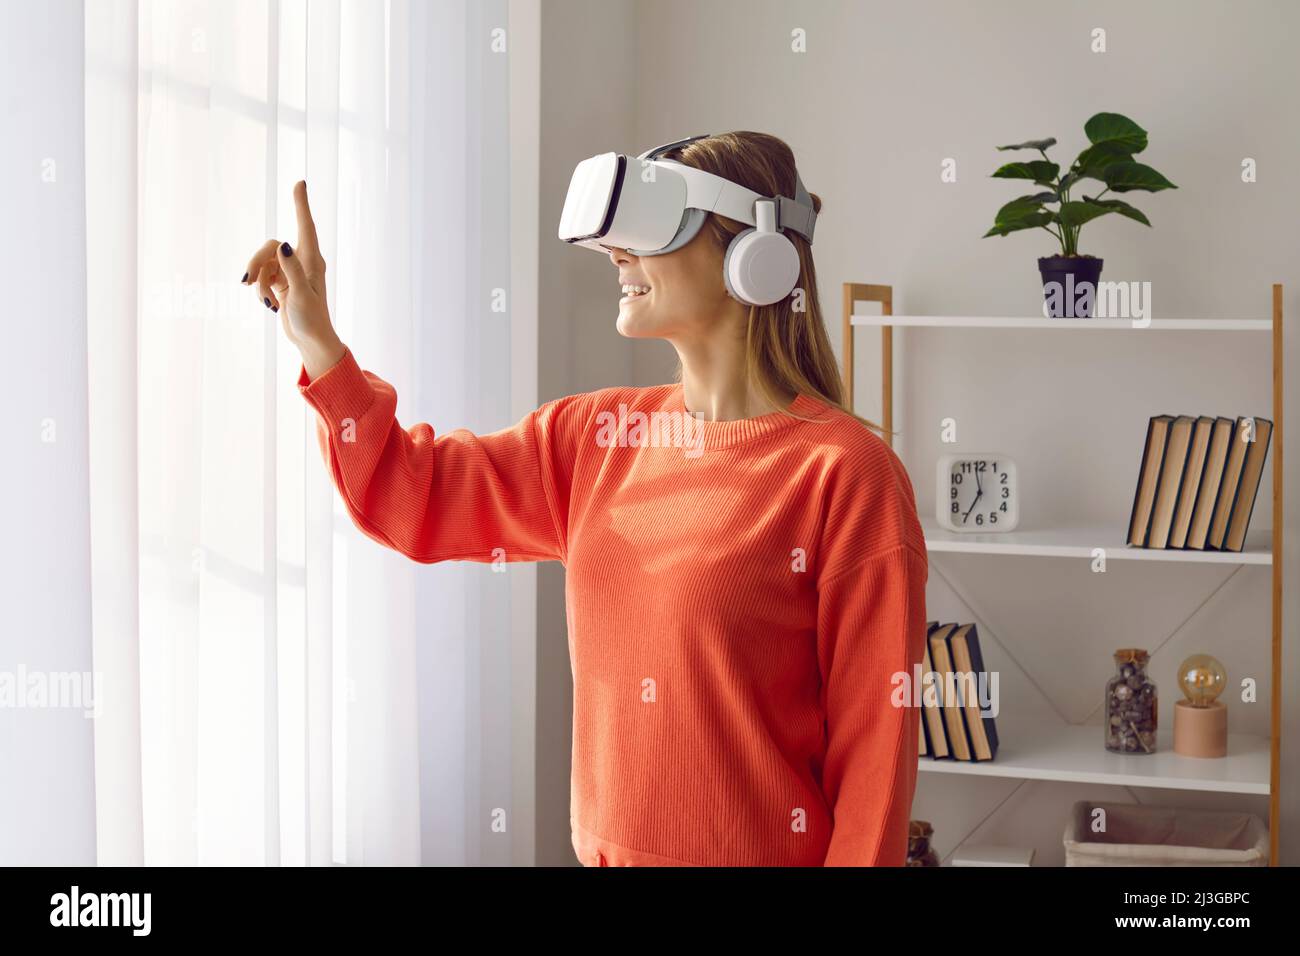 Happy woman wearing innovative VR headset experiencing virtual reality and playing games Stock Photo